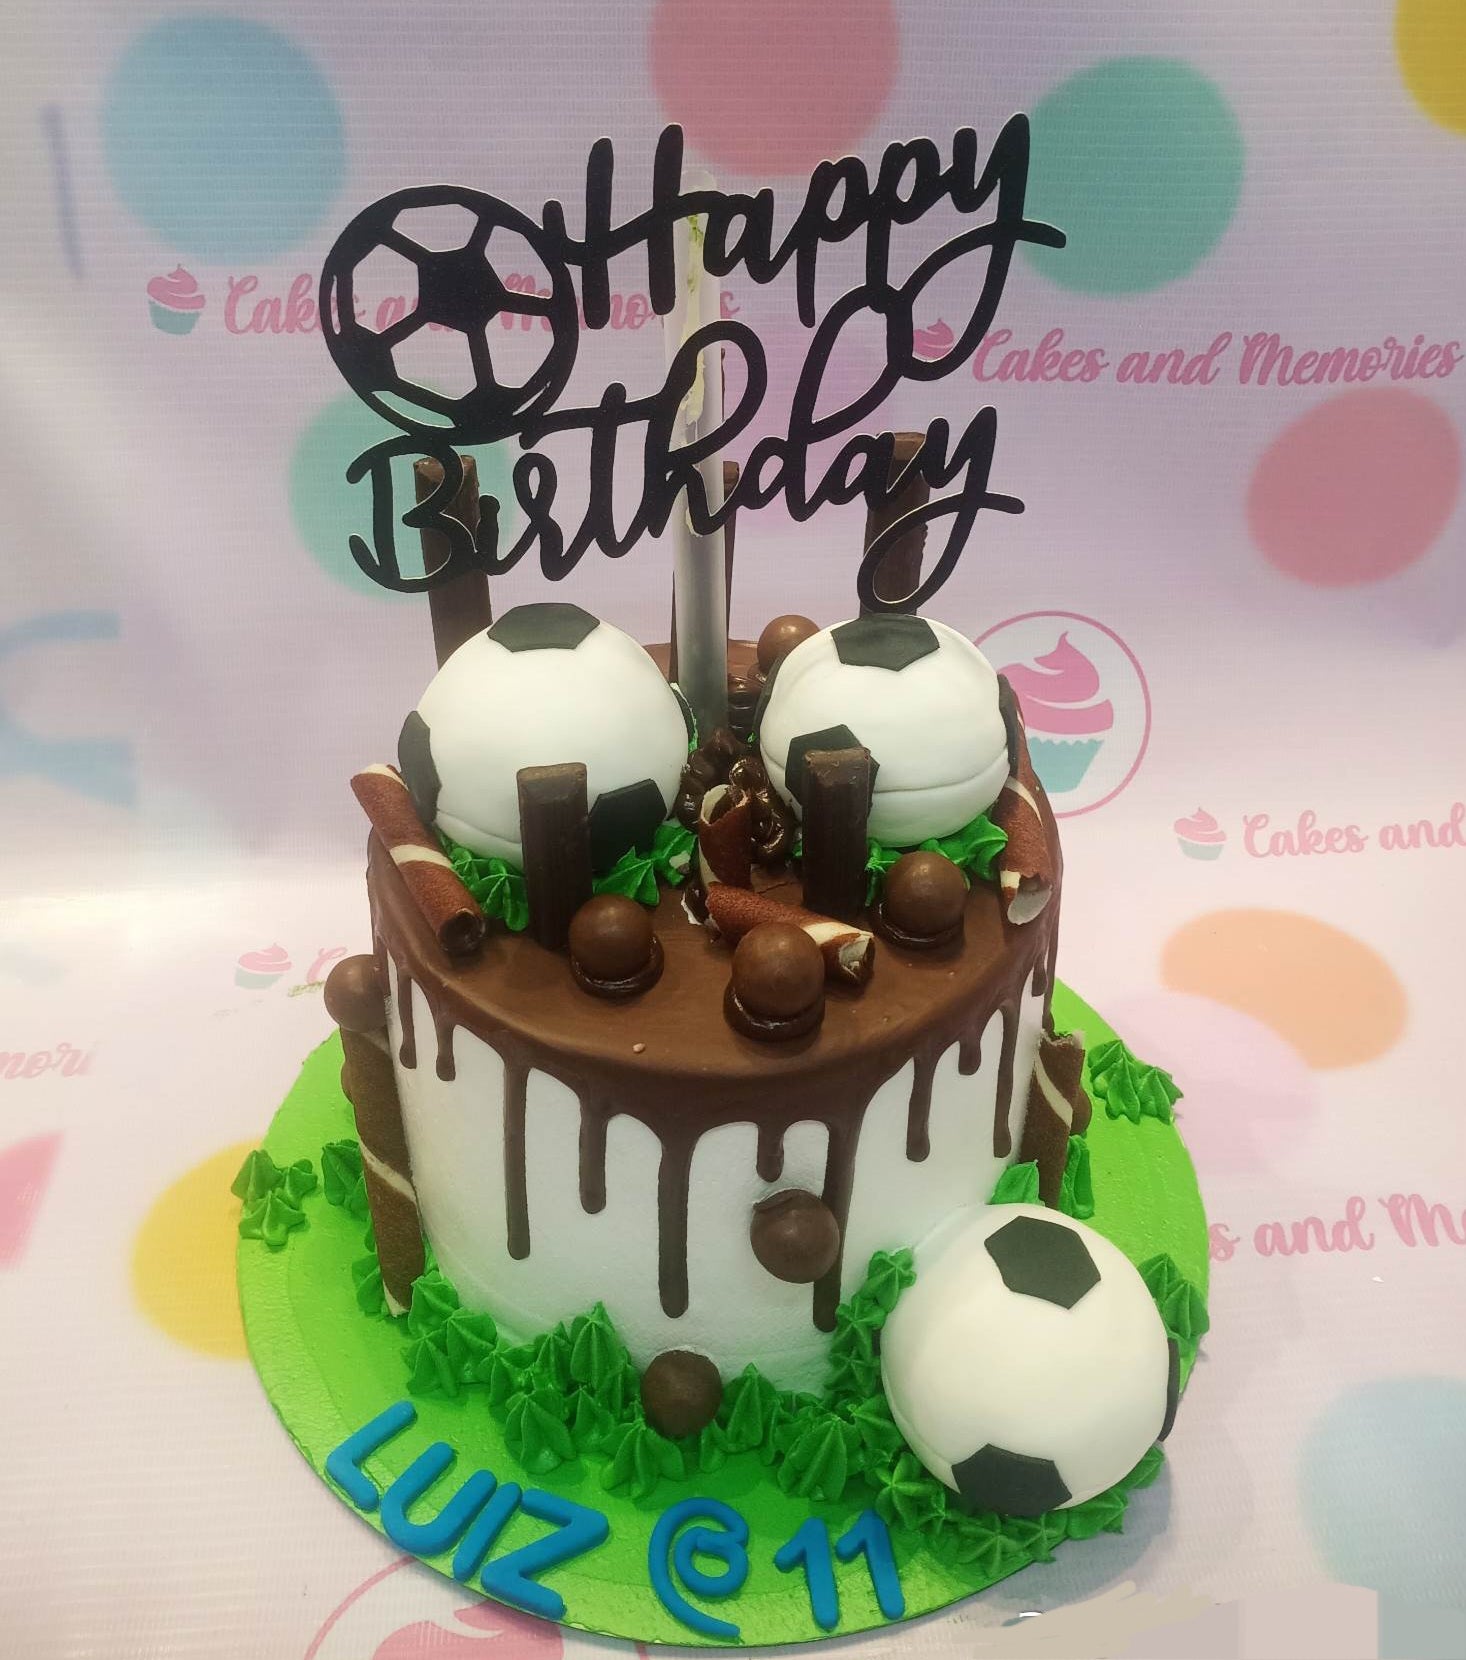 This custom decorated Soccer Cake is an ideal cake for birthdays and special occasions. With its green frosting, brown grass-like texture, and a realistic soccer ball, it is sure to make an impression. Delicately crafted with the utmost quality, this cake is sure to impress.